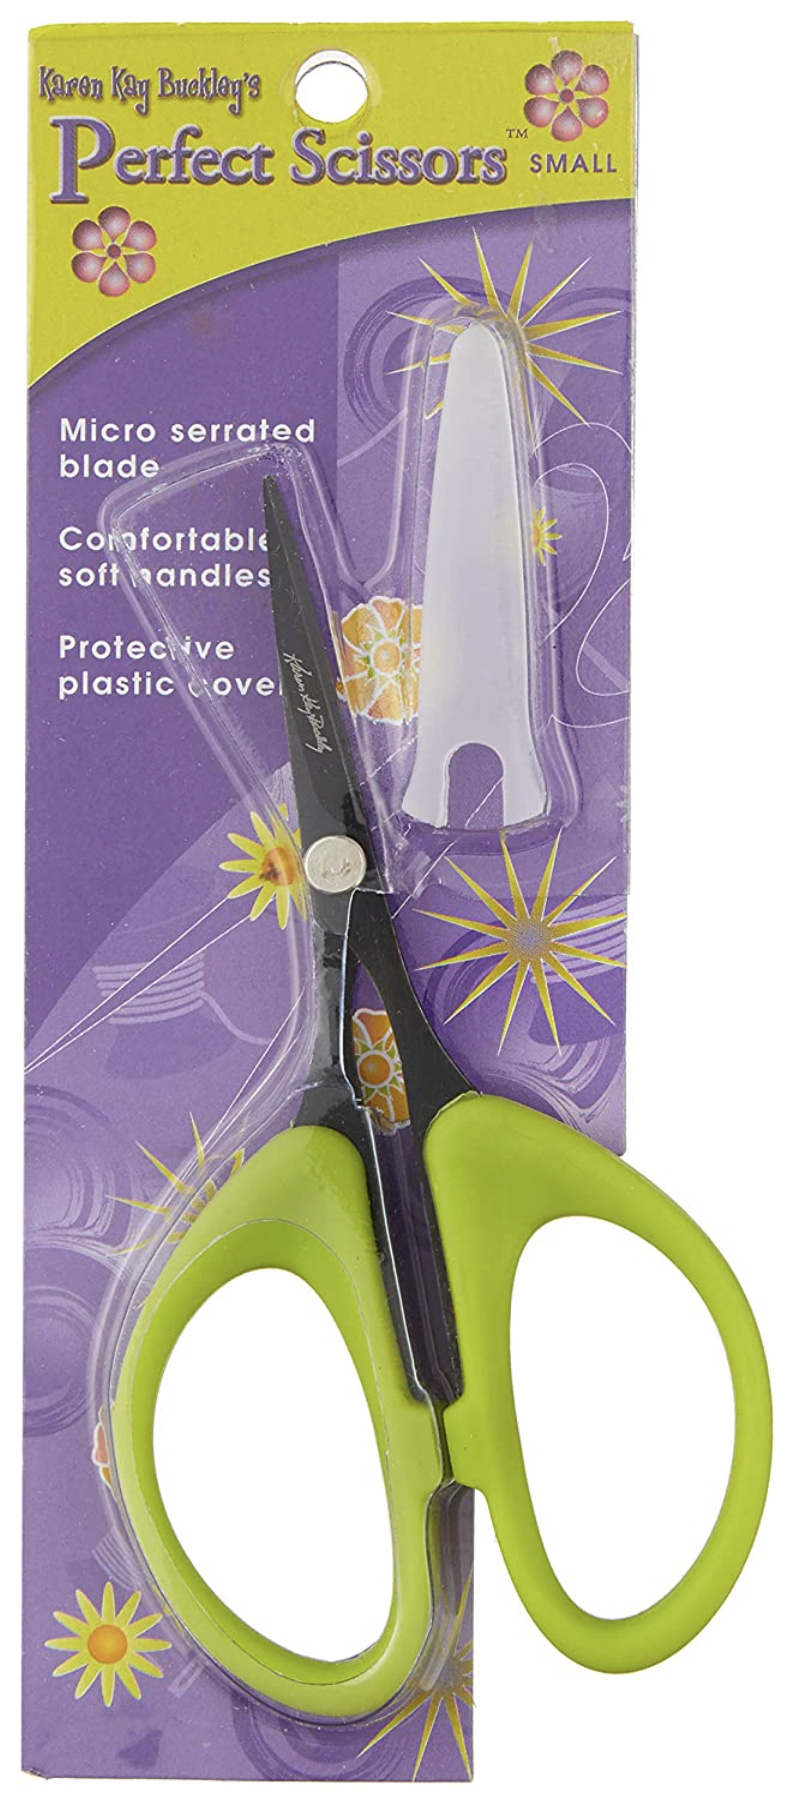 Cordless Electric Scissors by Pink Power